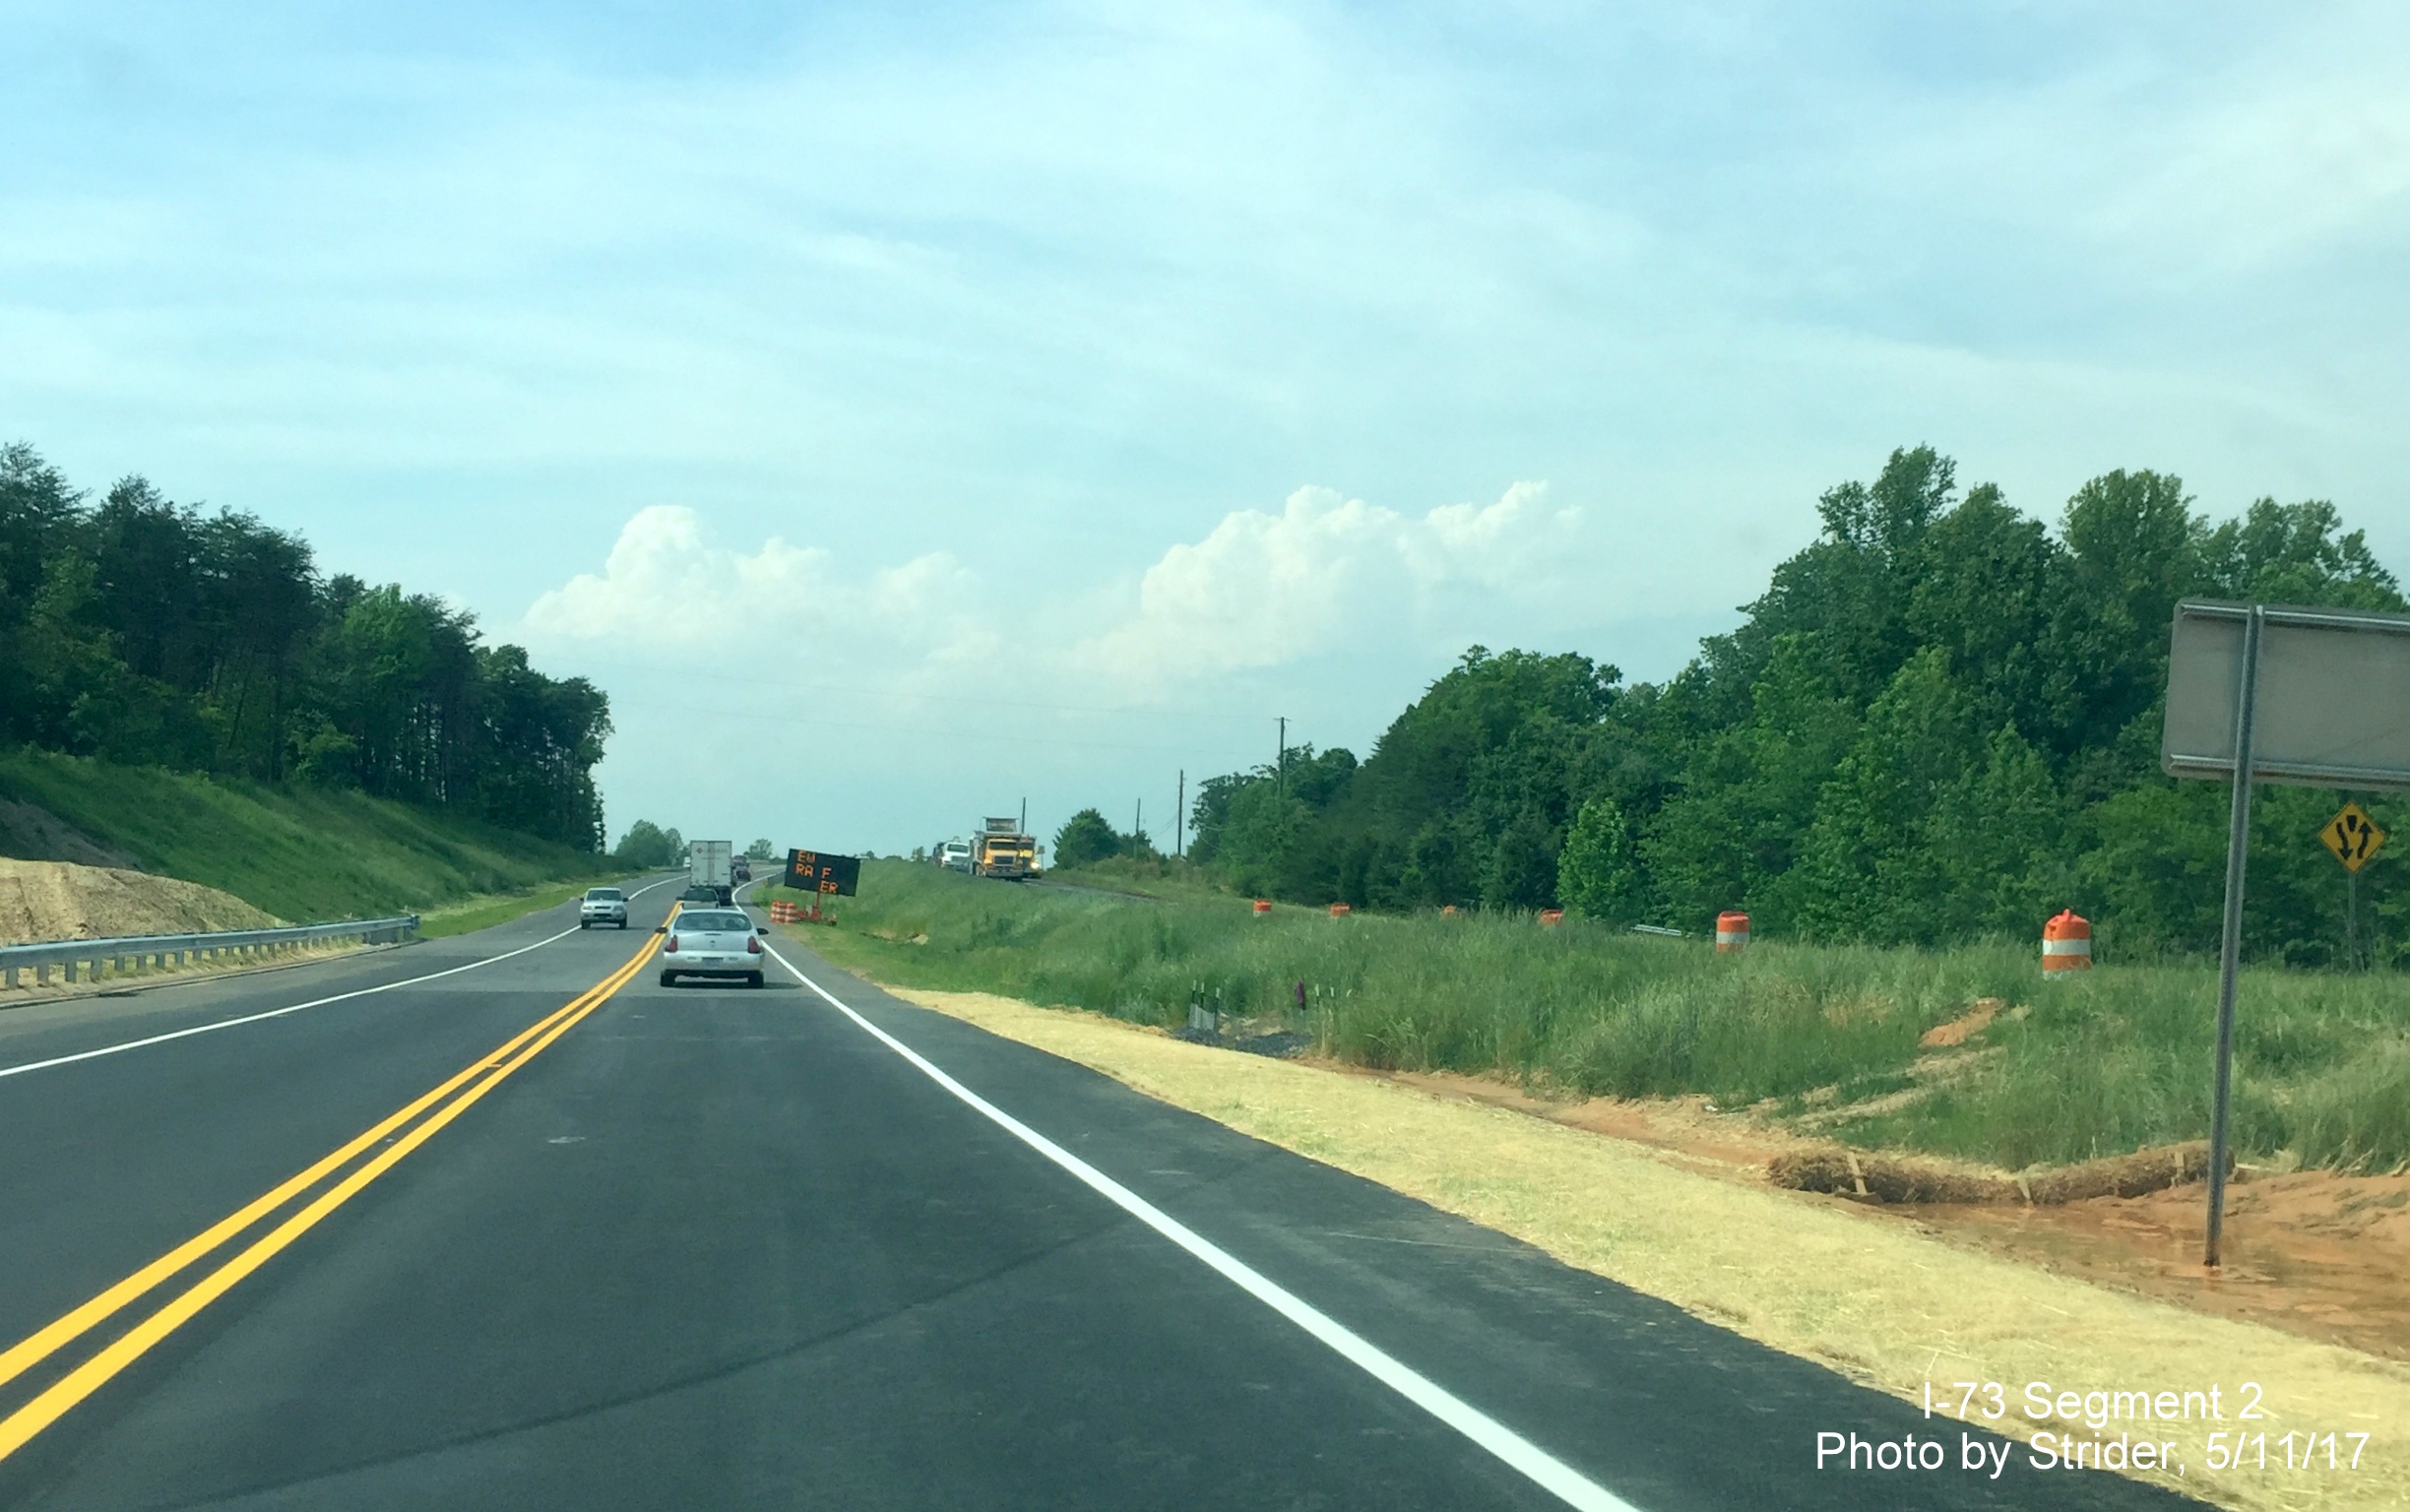 Image from US 220 using recently opened Future I-73 South lanes approaching NC 68 interchange, from Strider